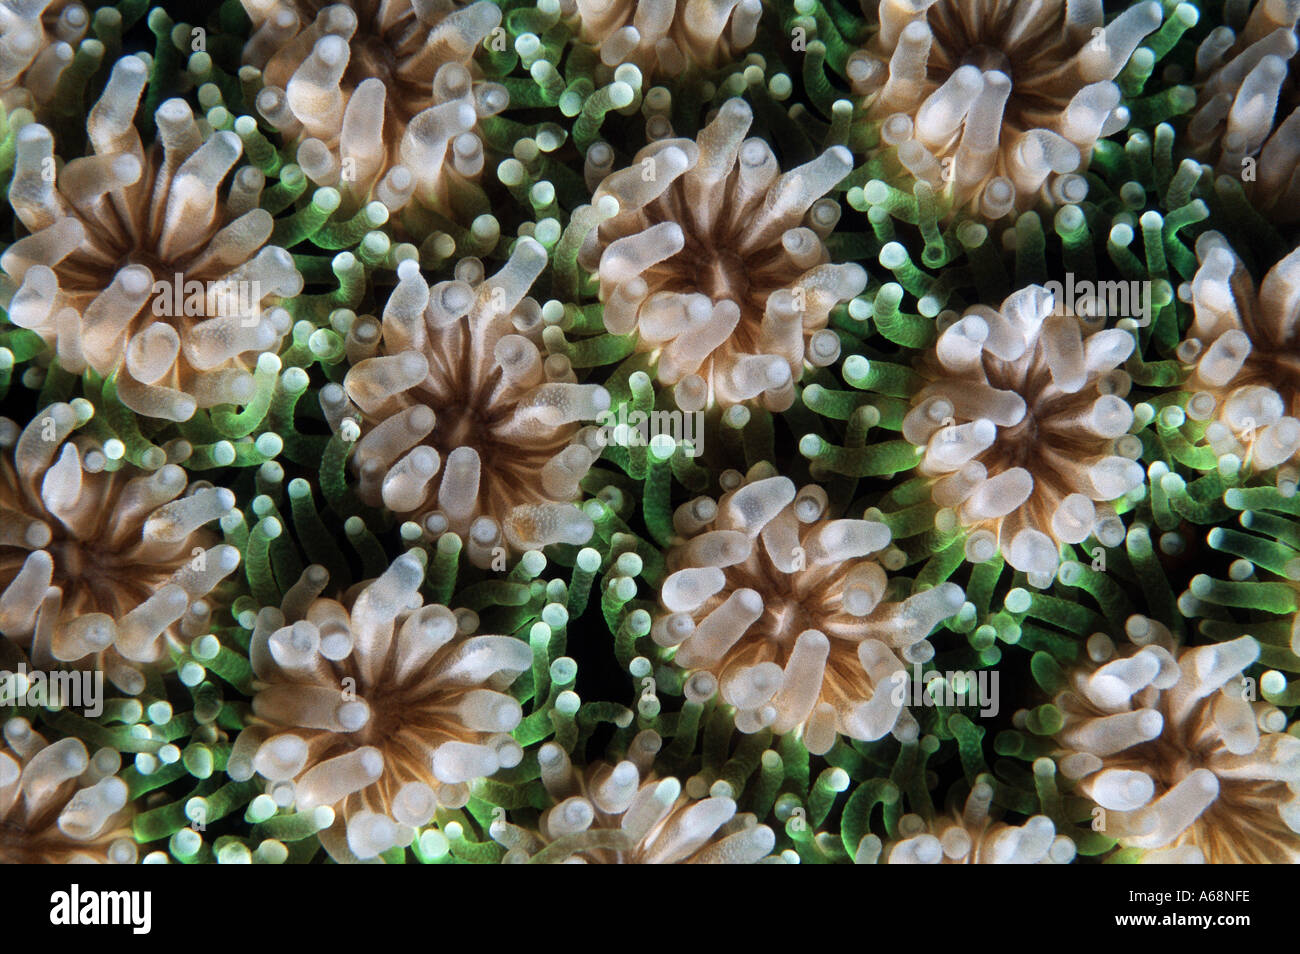 close up of coral texture Stock Photo